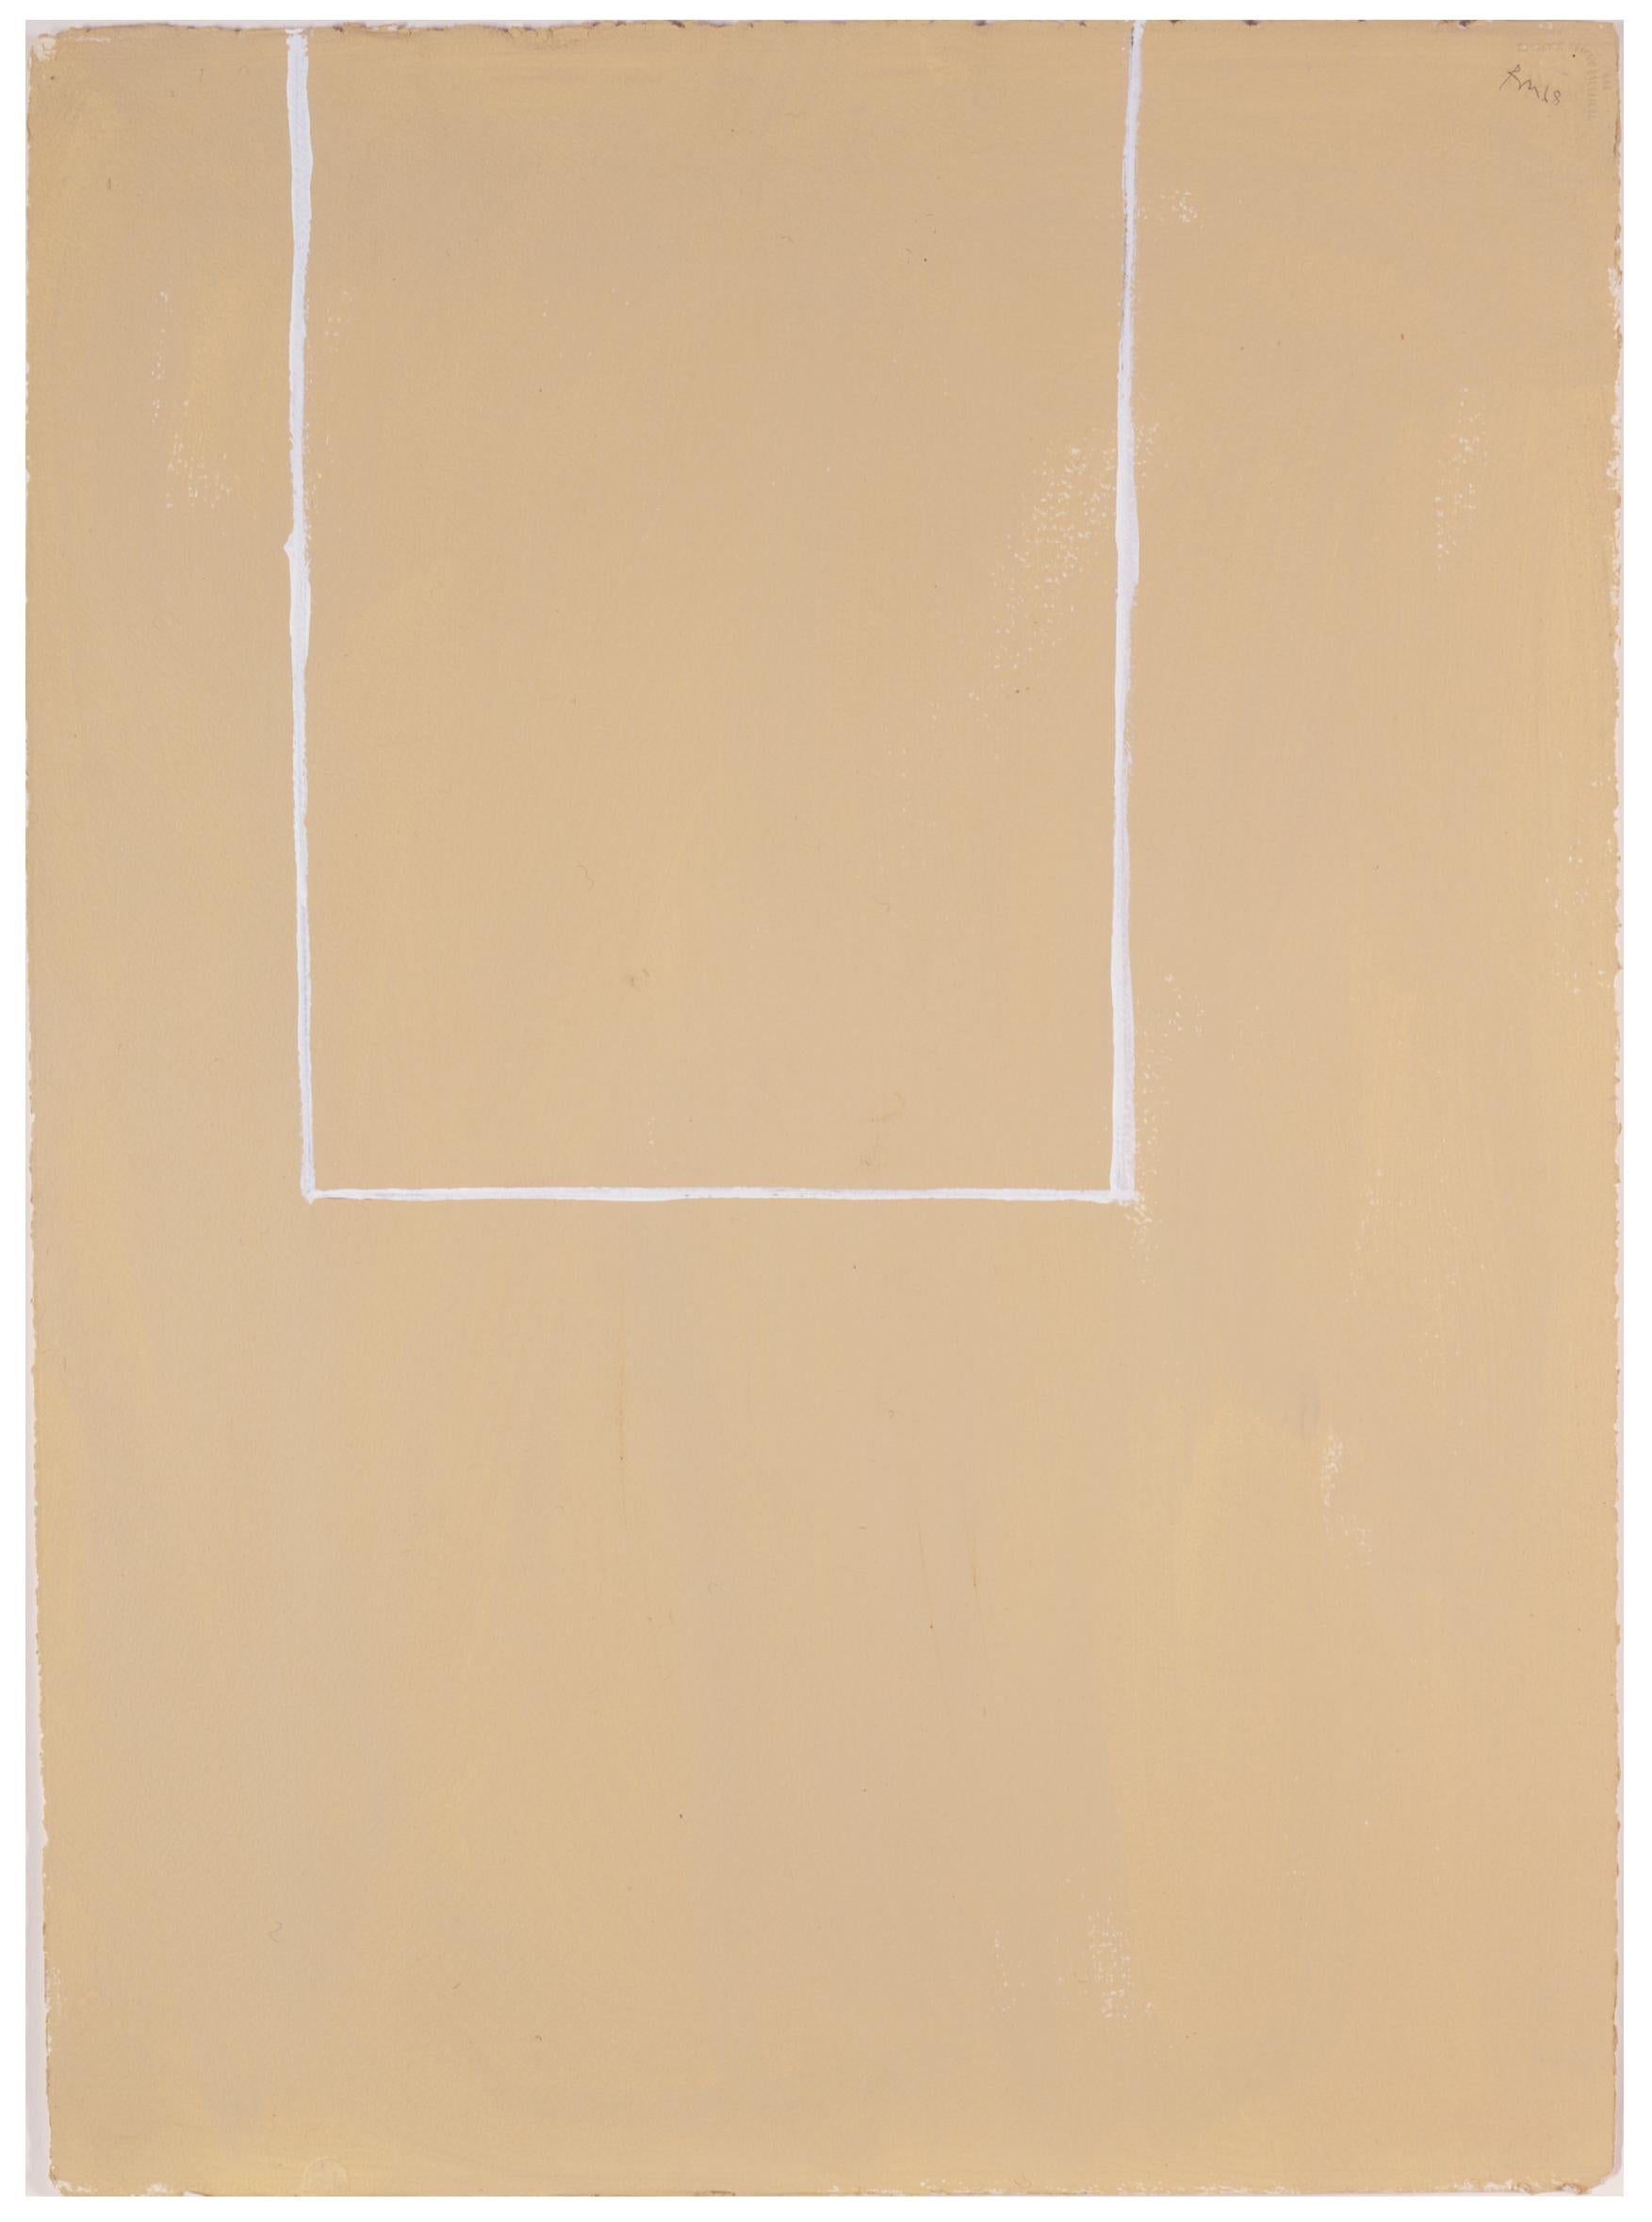 Robert Motherwell Abstract Painting - Open Study (White Line on Beige No. 2)